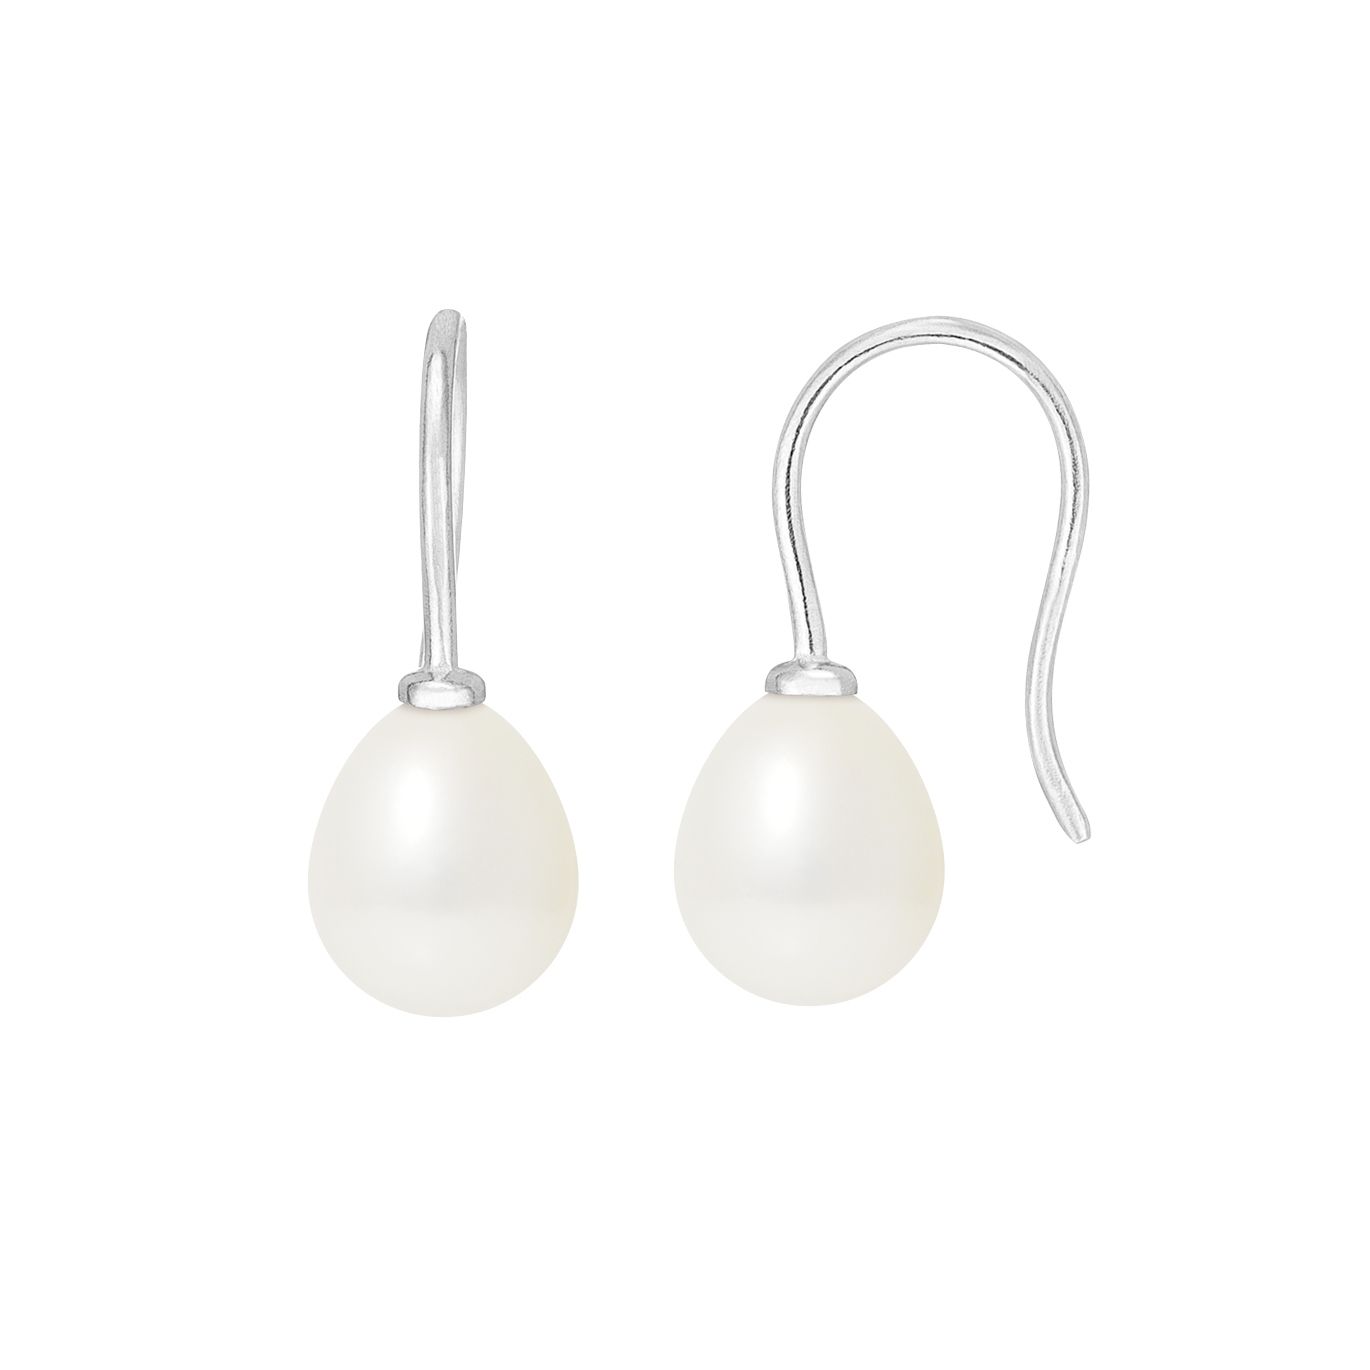 White Freshwater Pearls Hooks Earrings and White gold 375/1000 Made in France Beautiful pair of white freshwater cultured Pearls of 7 mm. Mount Solid gold White 375/1000. Form: Tear Diameter: 7 mm Luster: Excellent Quality: AA + Weight of gold: 0.70 gr